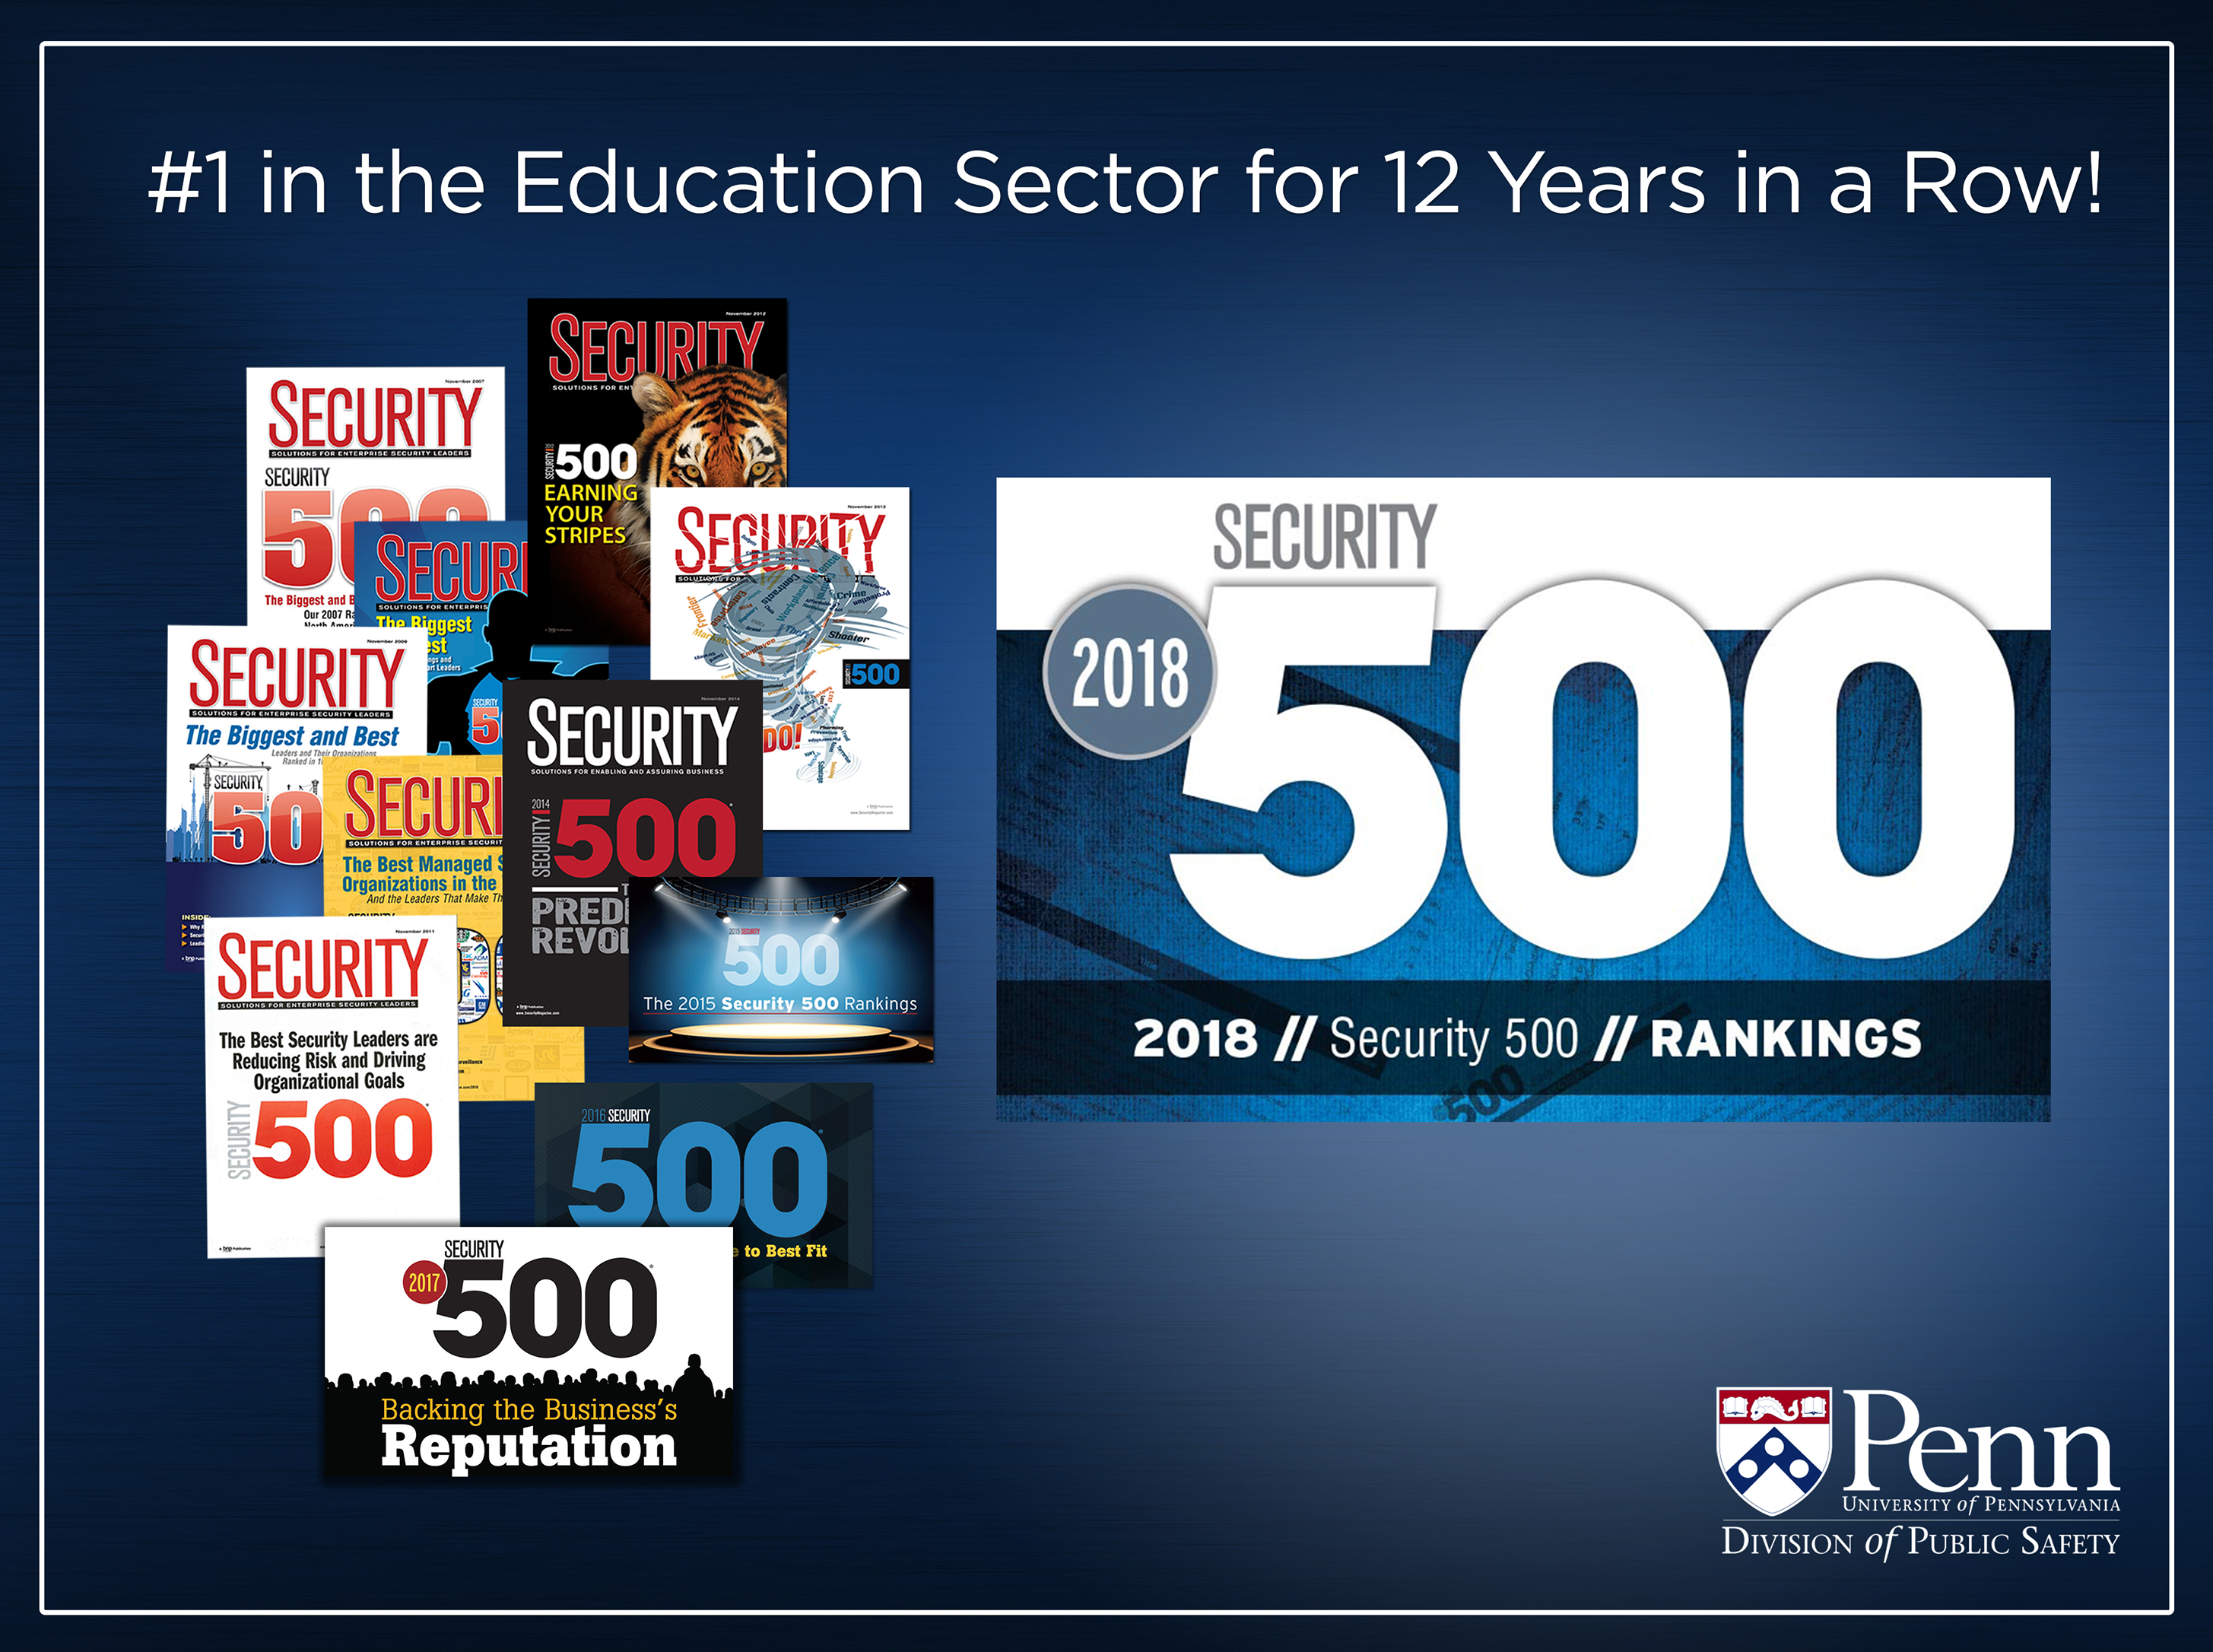 12 consecutive previous covers of Security magazine's Top 500 lists: all of which list Penn's Public Safety as #1 in the higher education sector.